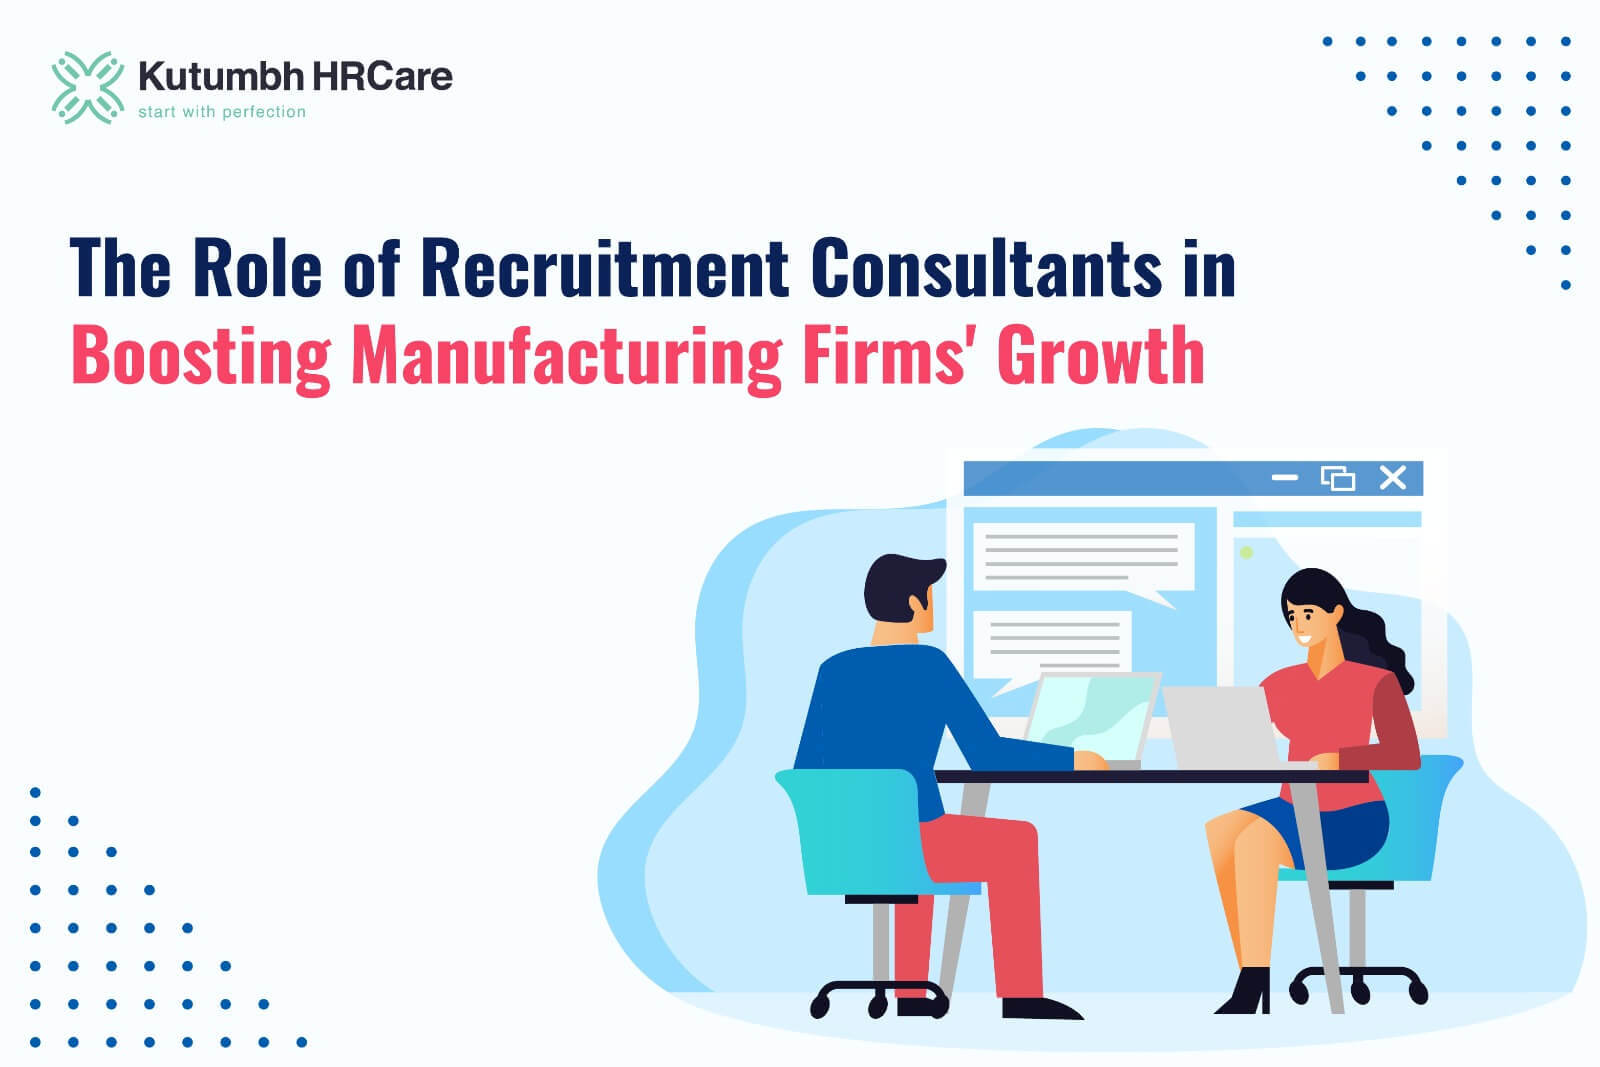 The Role of Recruitment Consultants in Boosting Manufacturing Firms' Growth